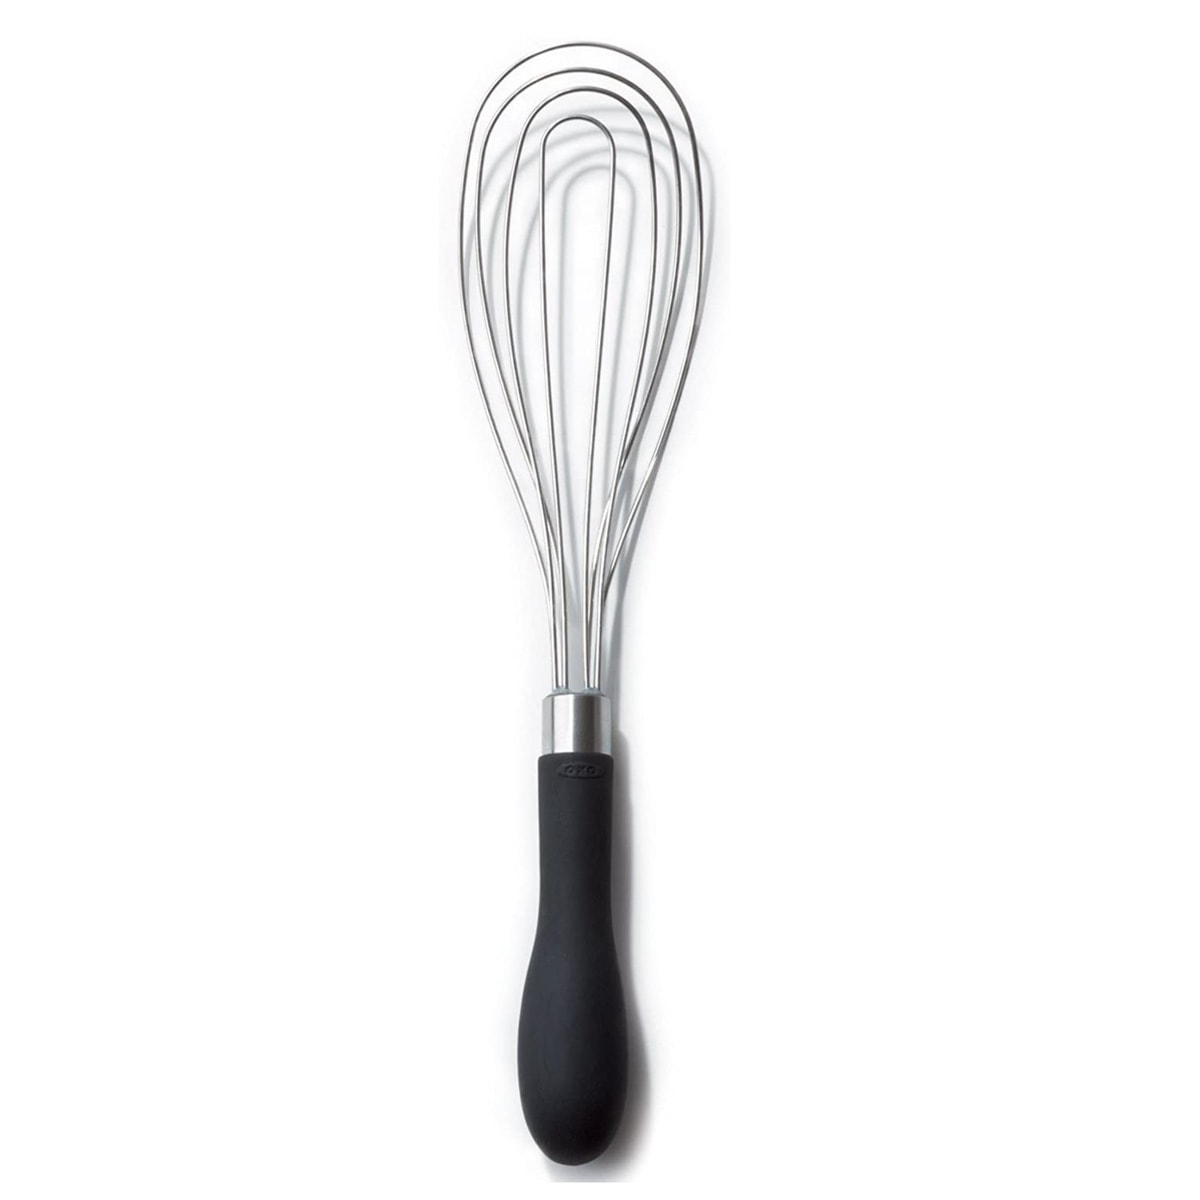 A flat whisk.